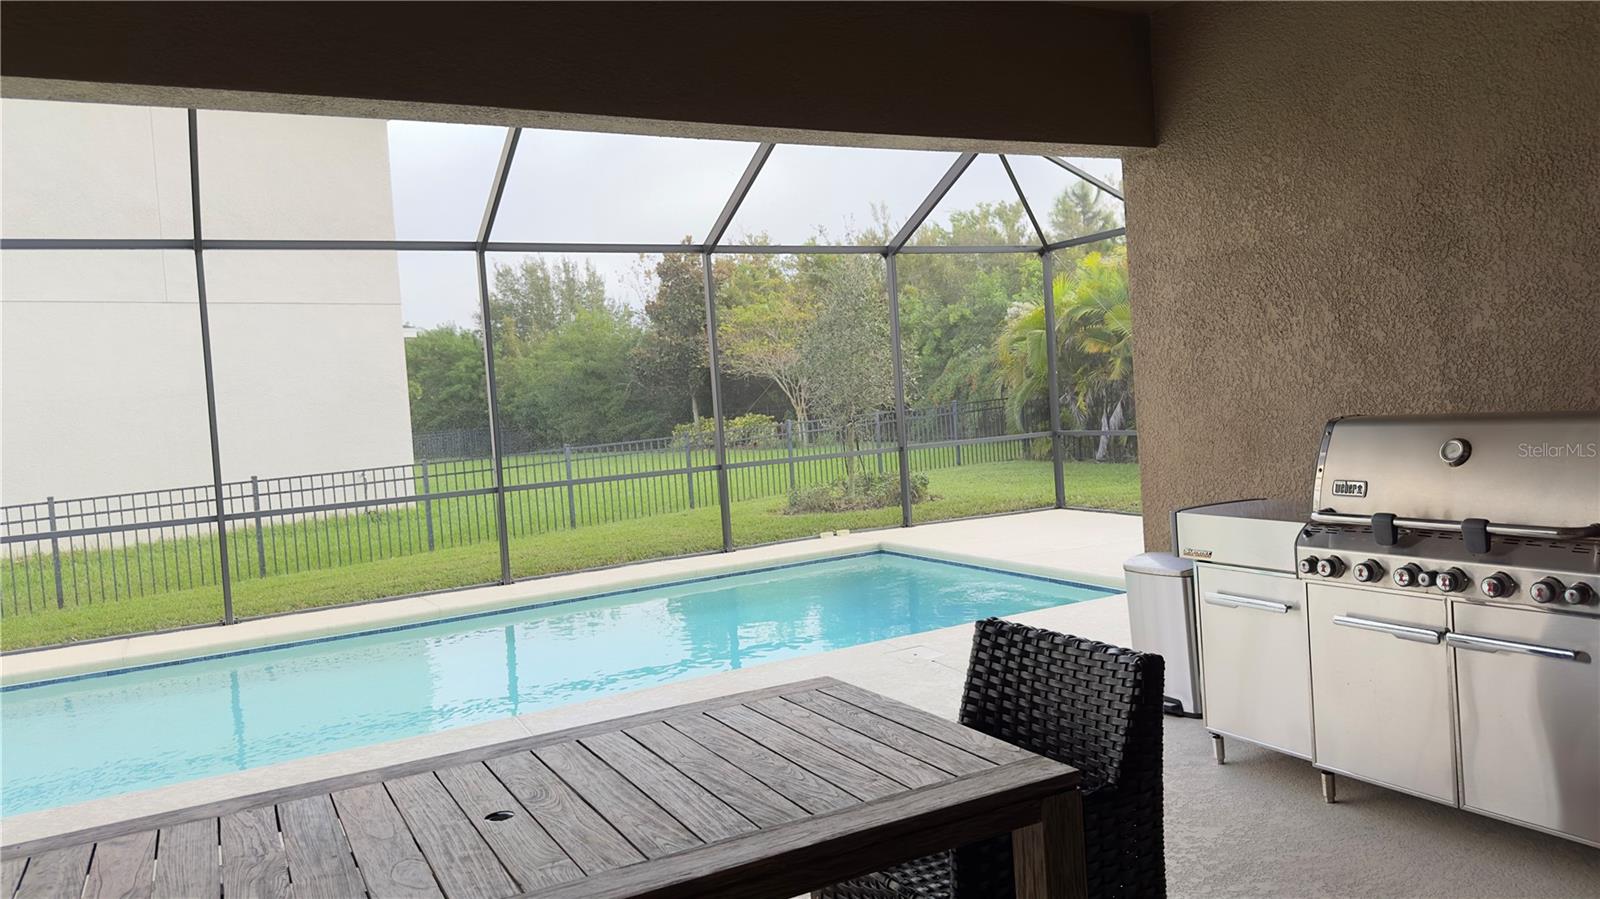 The covered and screened lanai has plenty of space for hosting a barbecue or party